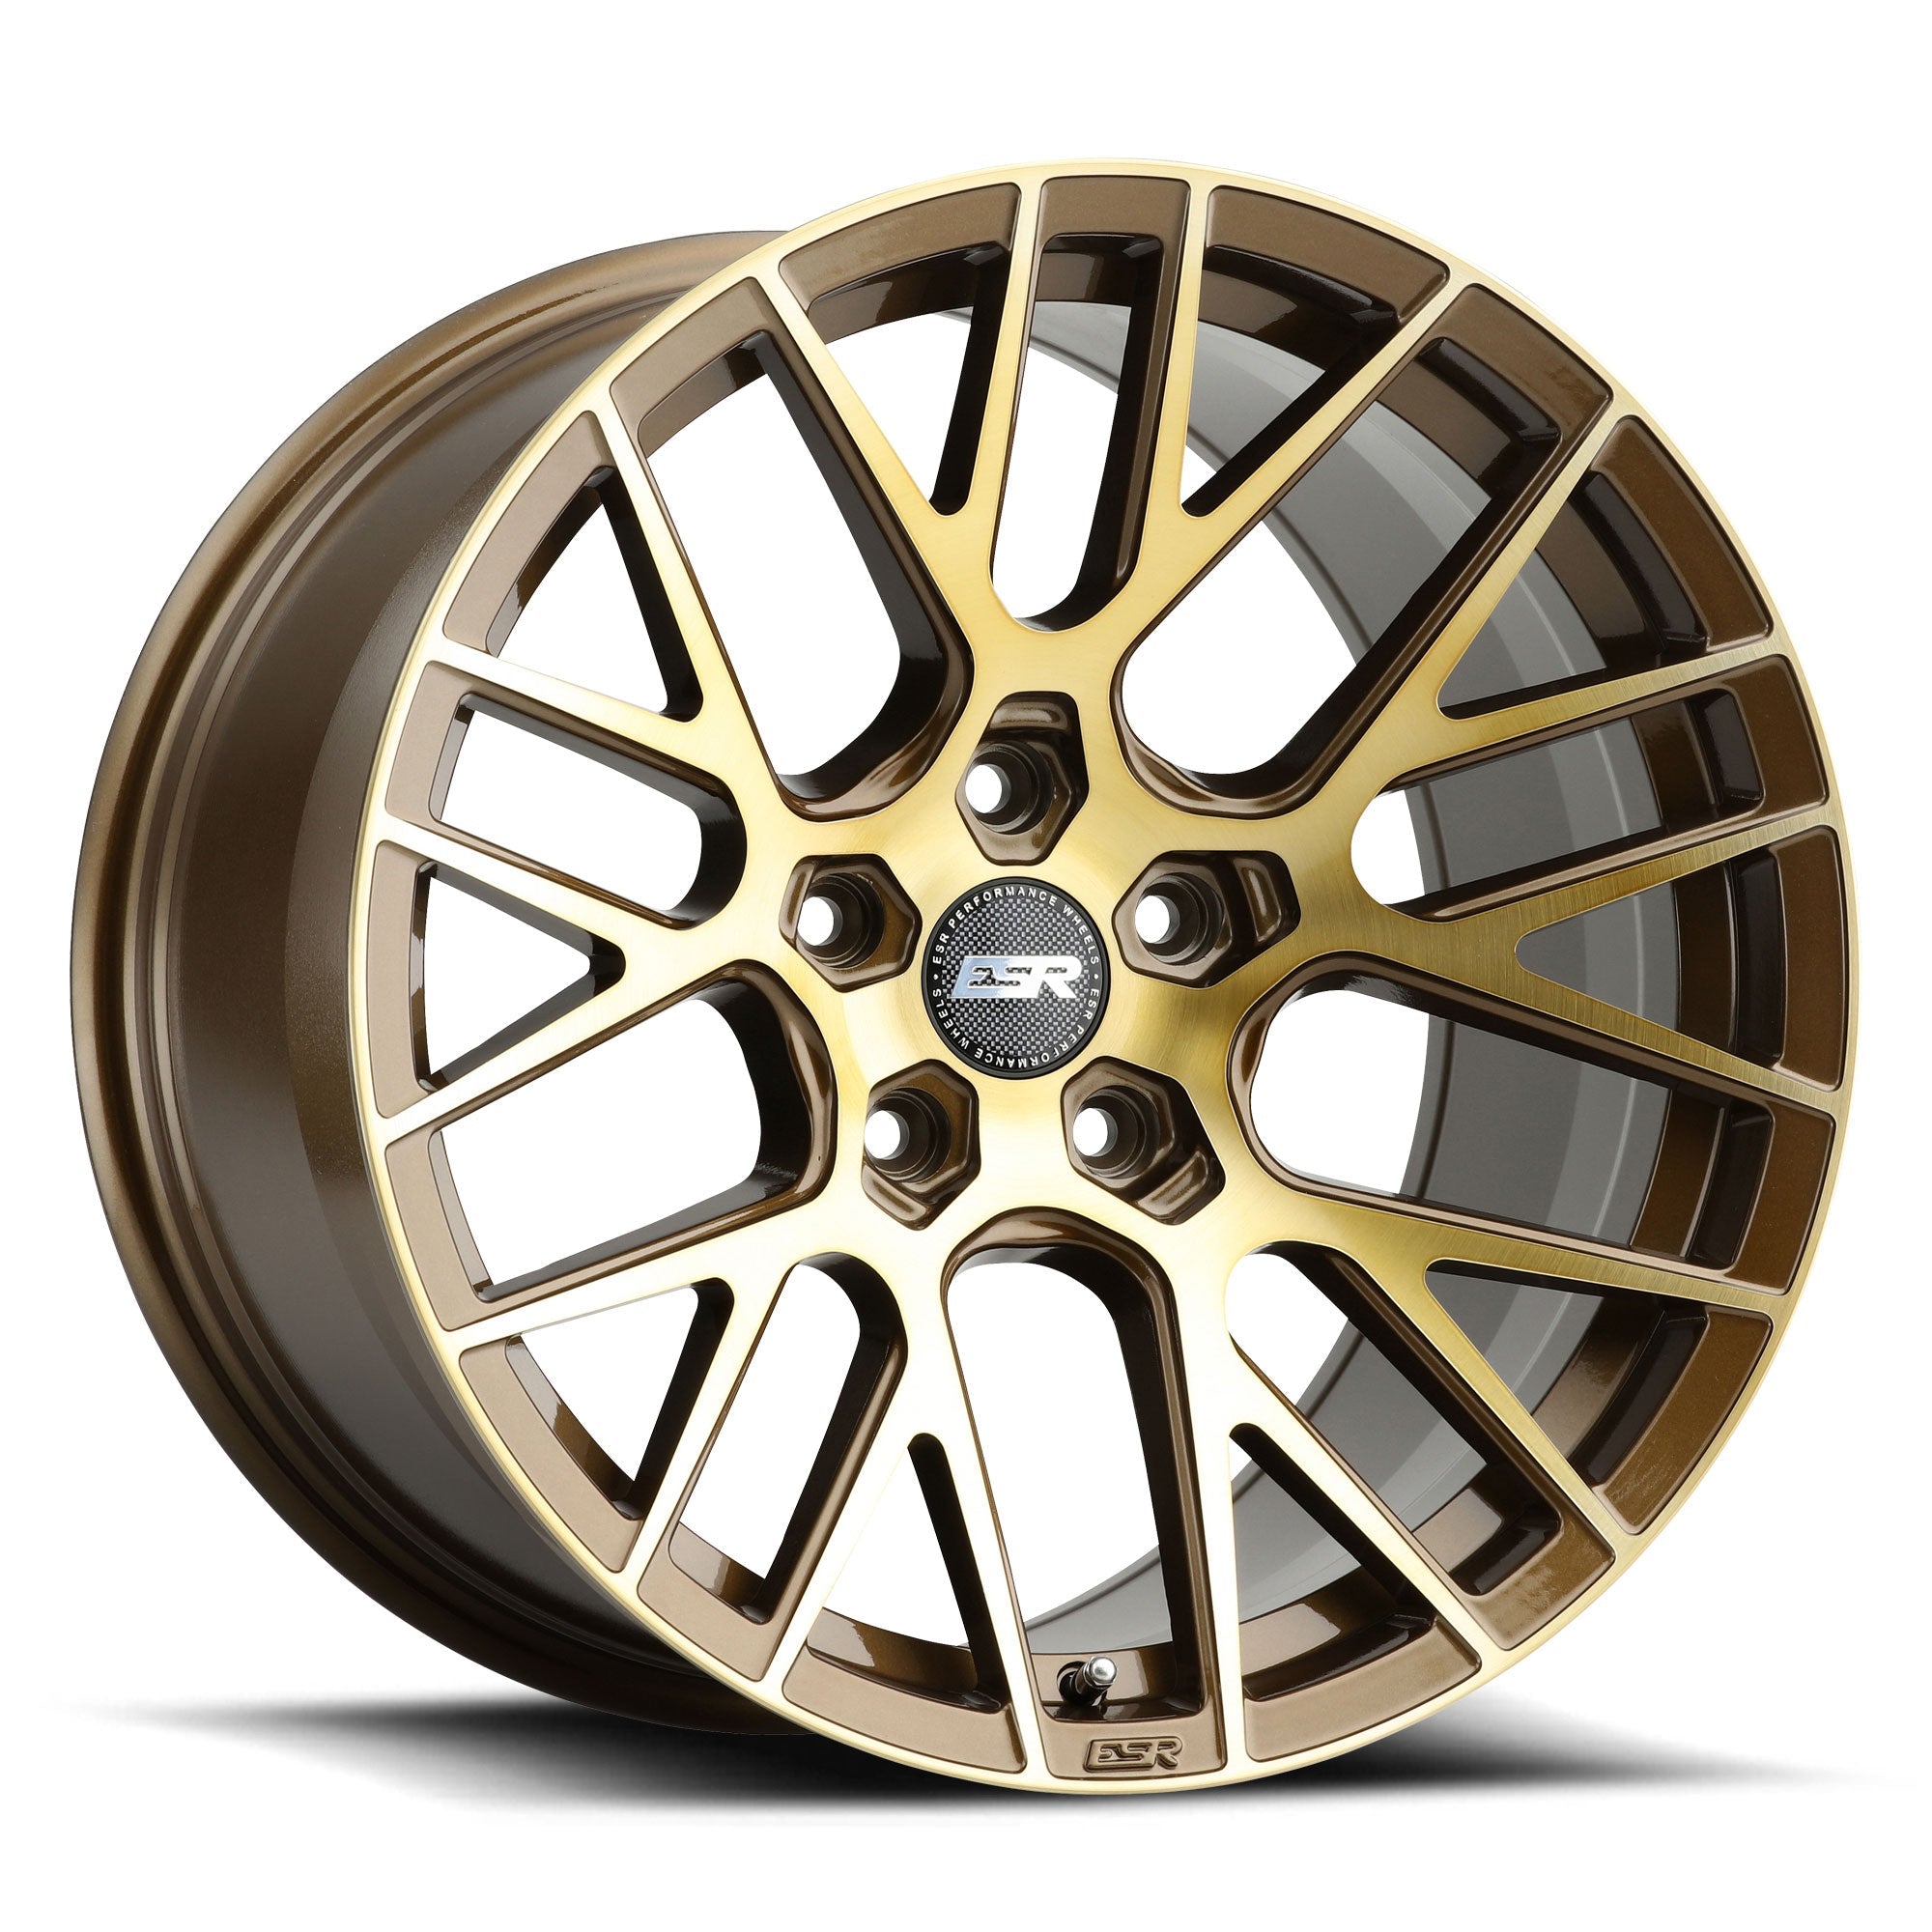 rf11 brushed champagne bronze * limited edition*